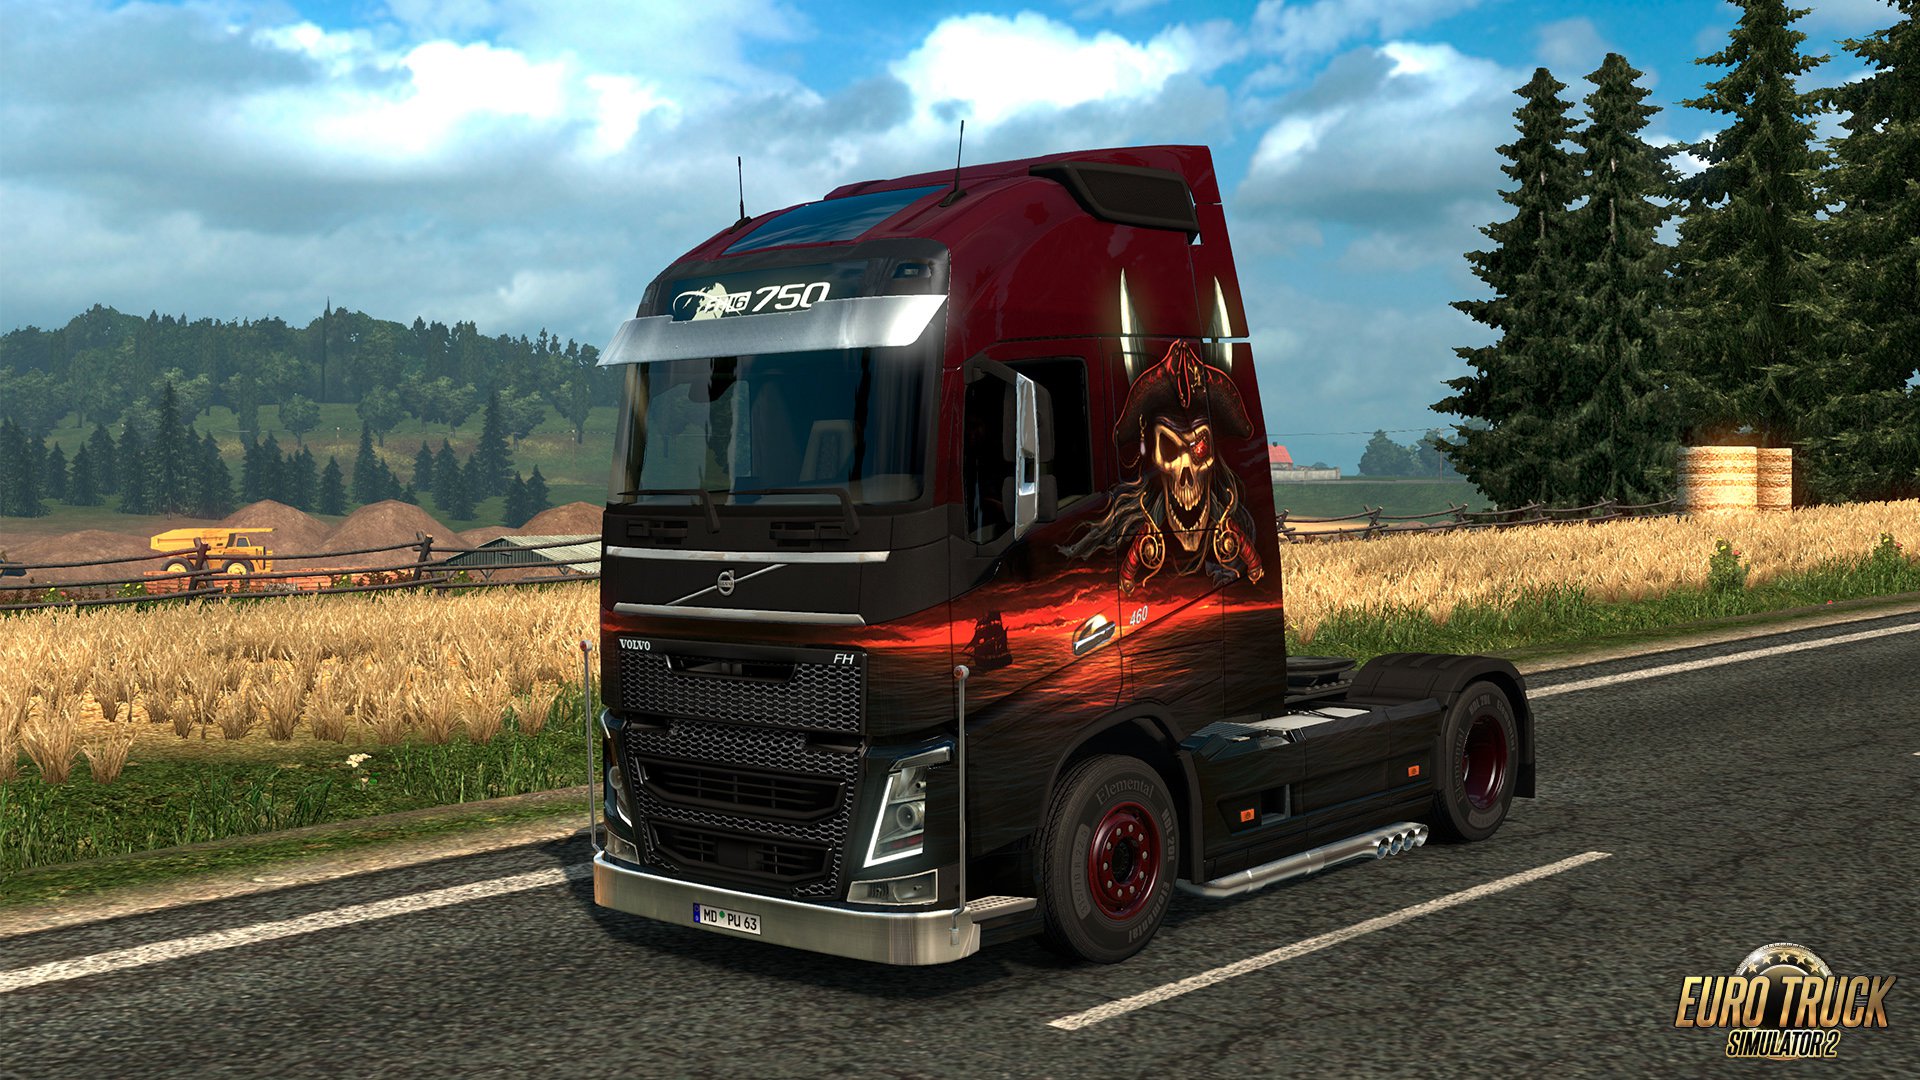 Euro Truck Simulátor 2 Pirate Paint Jobs Pack 4